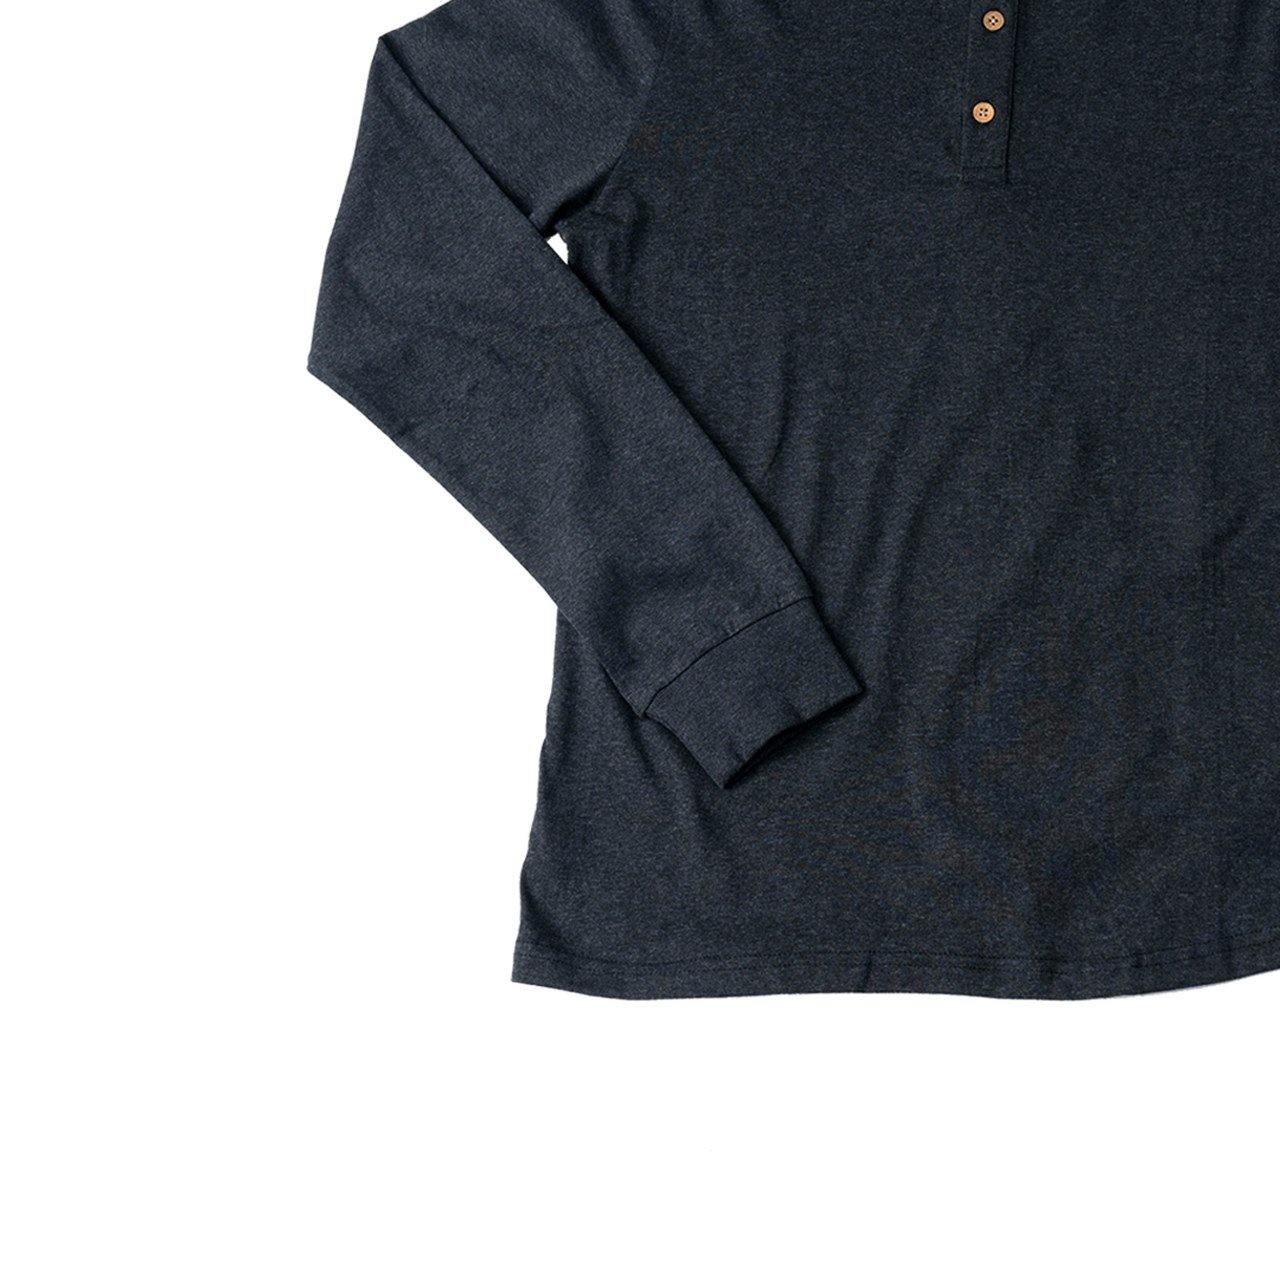 Charcoal Henley (Slim Fit) - Oneforblue